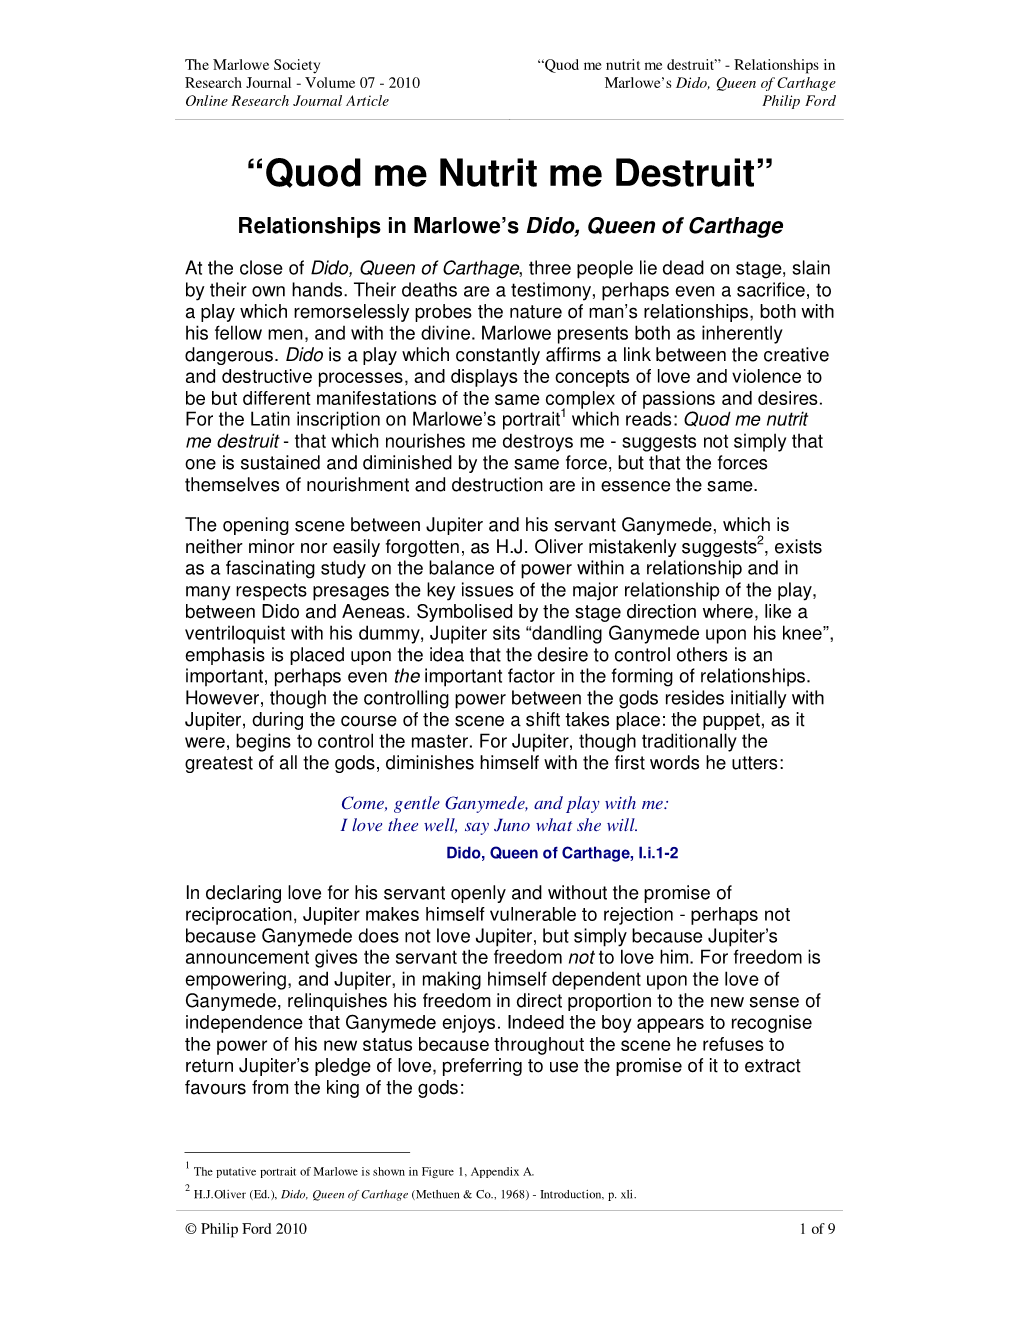 “Quod Me Nutrit Me Destruit” - Relationships in Research Journal - Volume 07 - 2010 Marlowe’S Dido, Queen of Carthage Online Research Journal Article Philip Ford